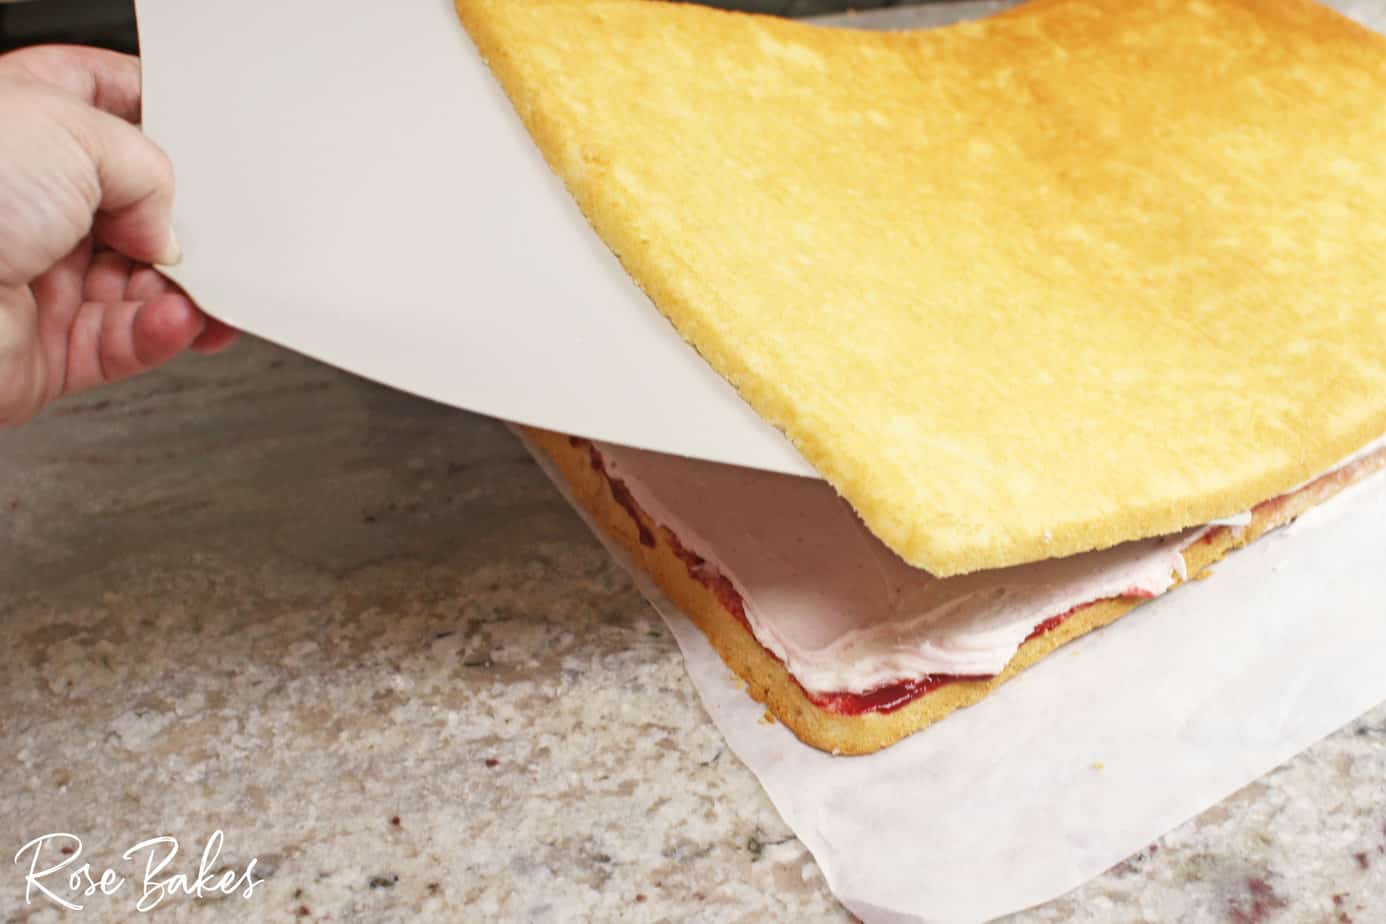 using a flexible cutting board to move the top layer back on top of the layer with filling and frosting.